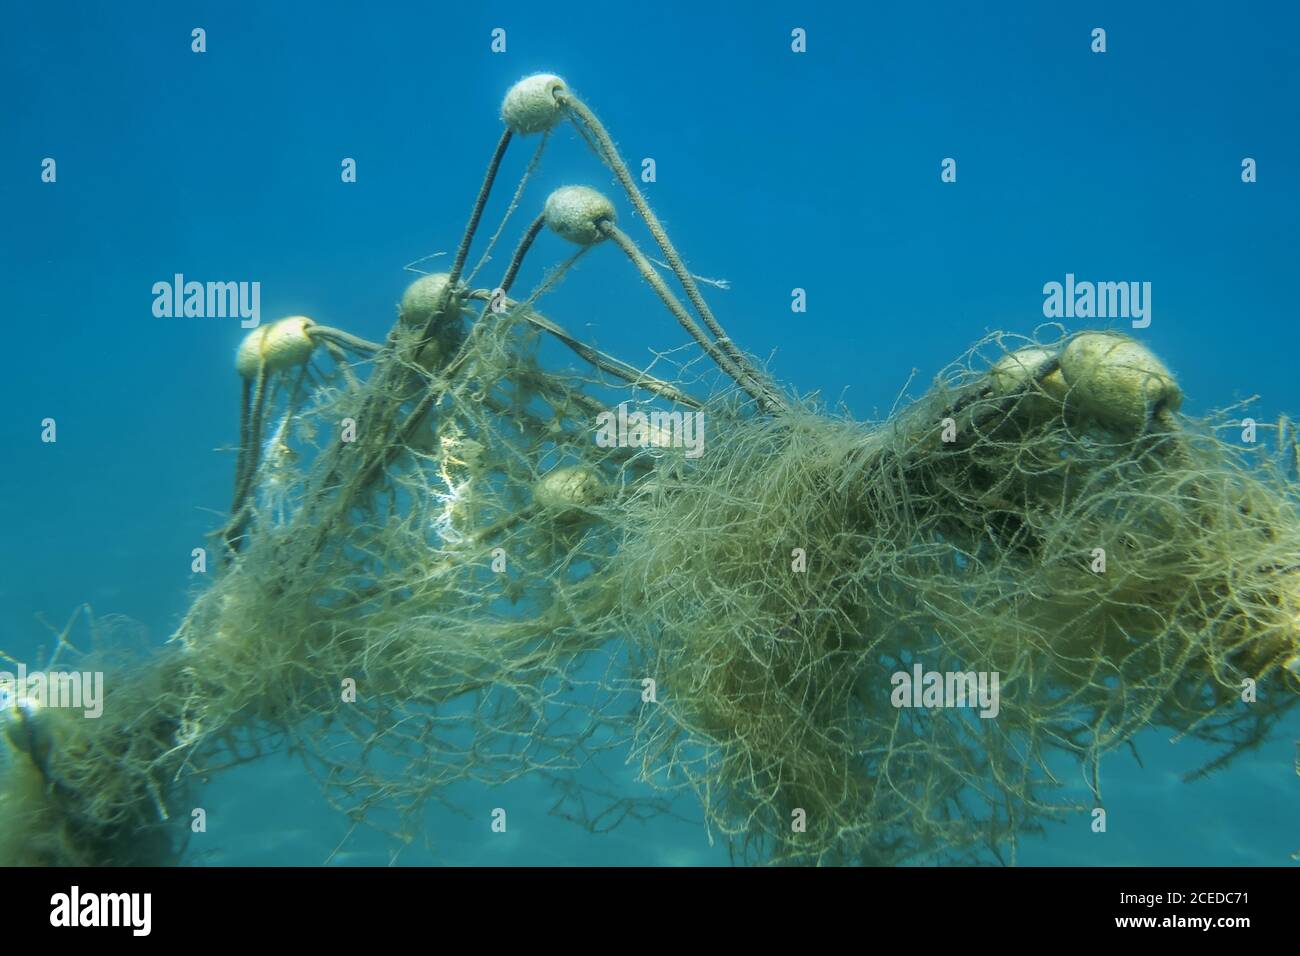 Lost fishing net with buoys lies underwater on the seabed on blue water background. Becici, Budva Municipality, Montenegro Stock Photo